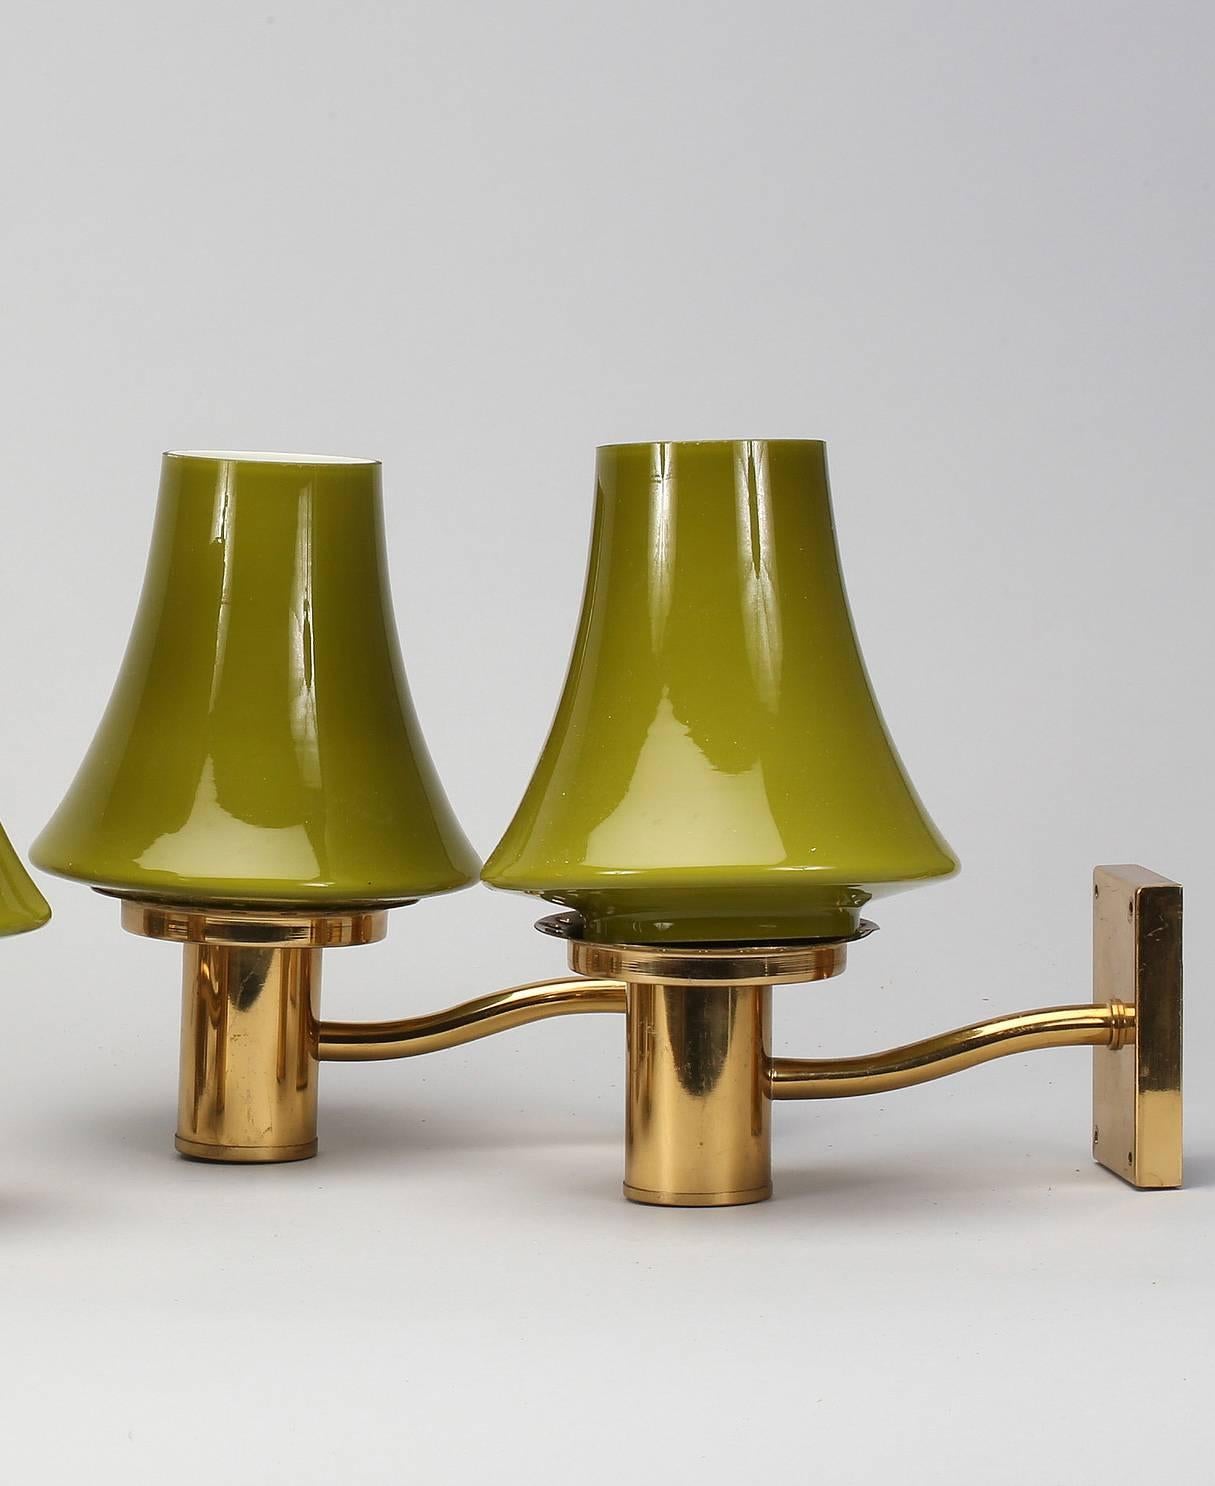 Pair of wall lights designed by Hans-Agne Jakobsson, Sweden, circa 1960s.
Measures: H 9